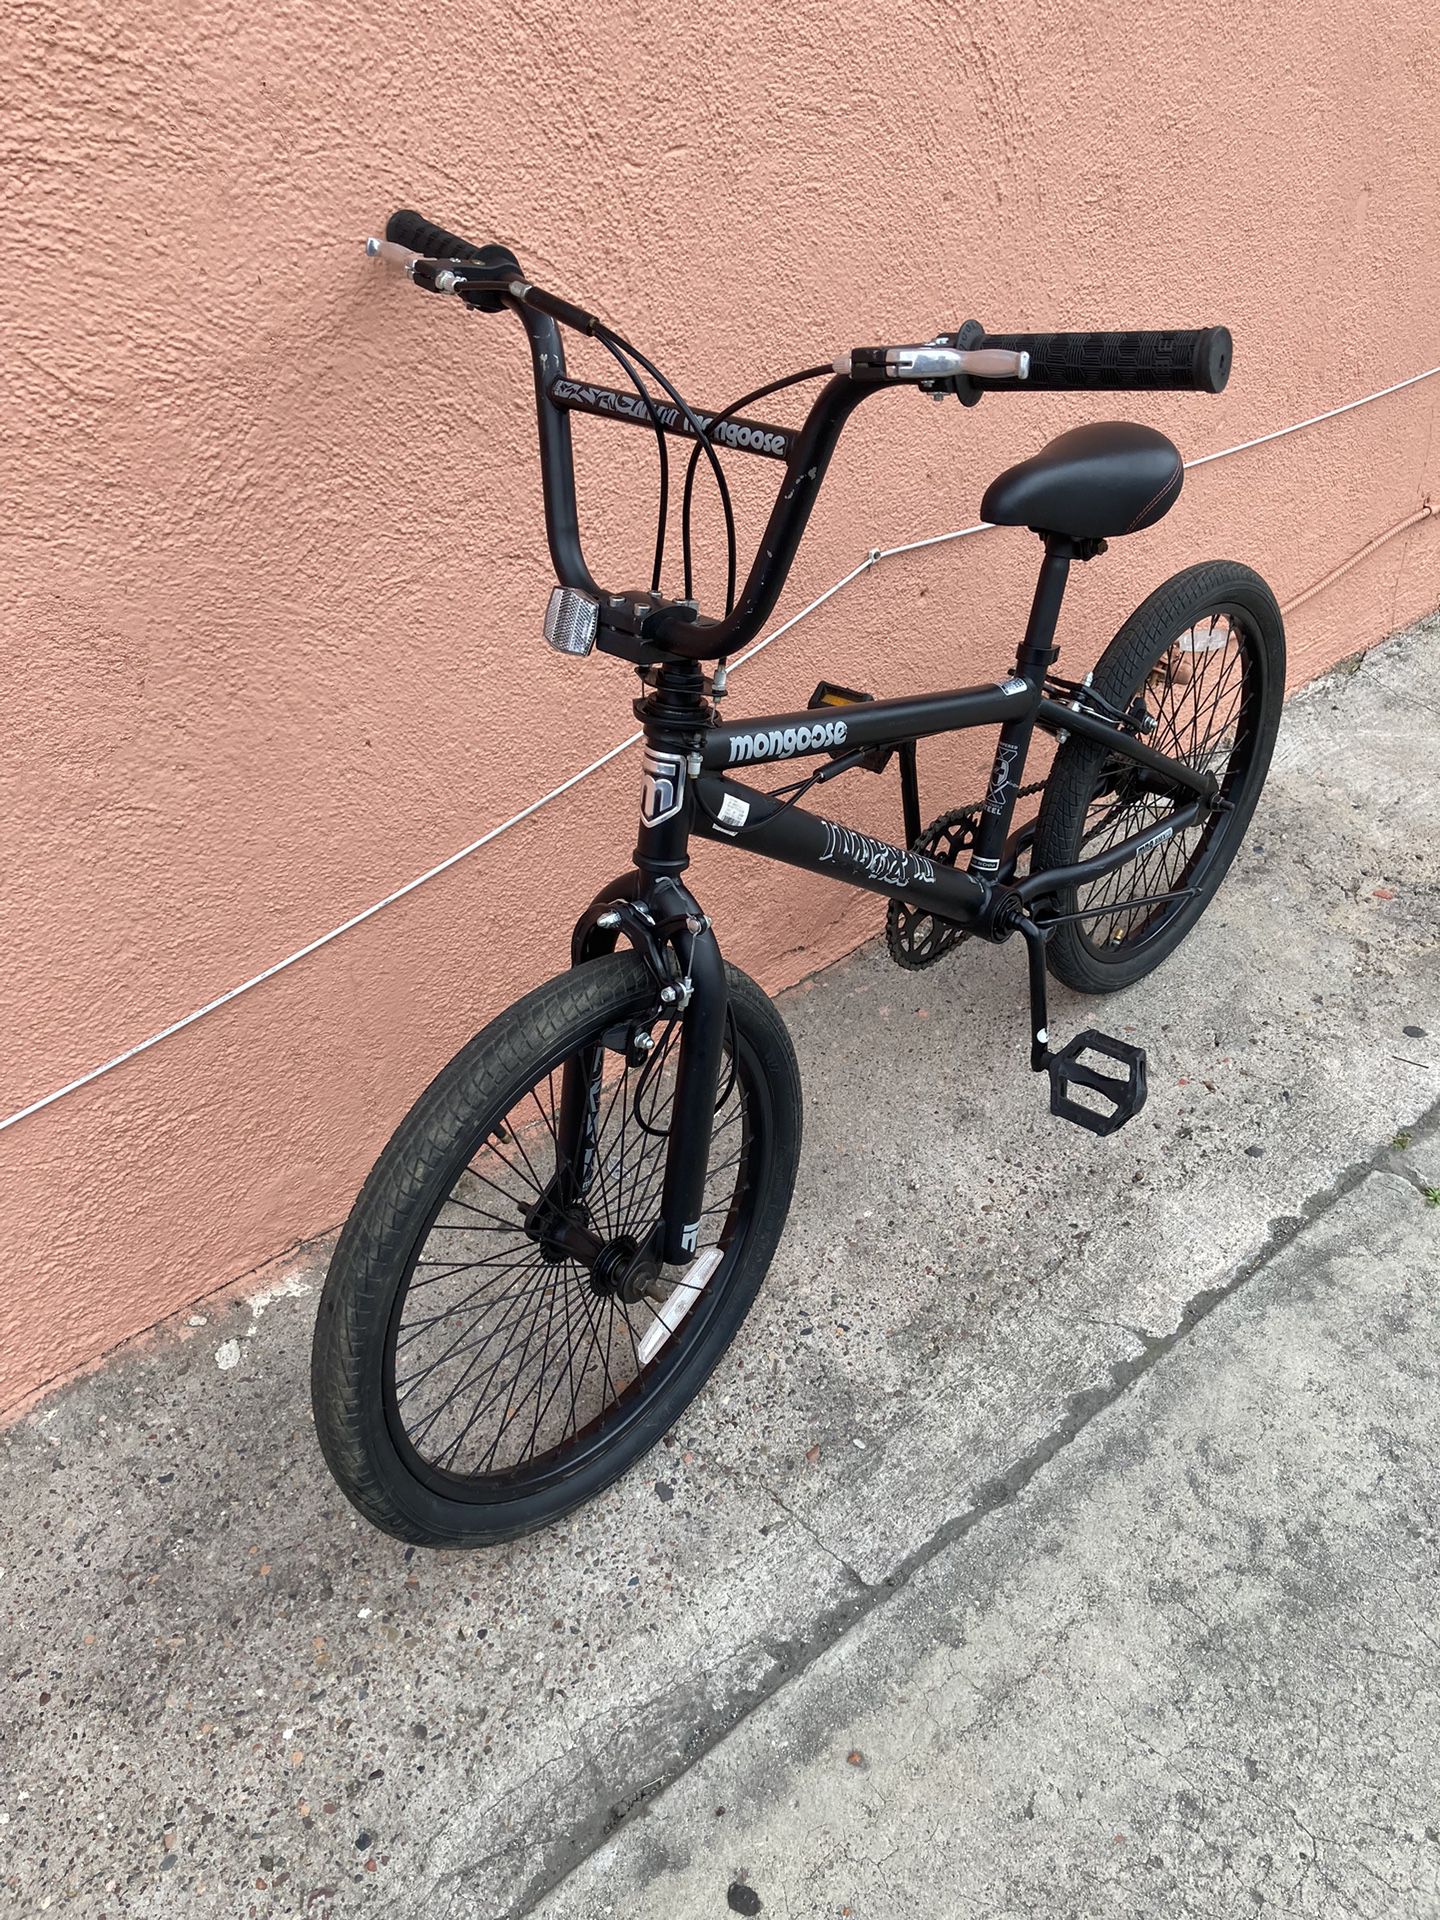 Mongoose Bmx Bike 20 Inches Tires Good Condition Ready To Ride 